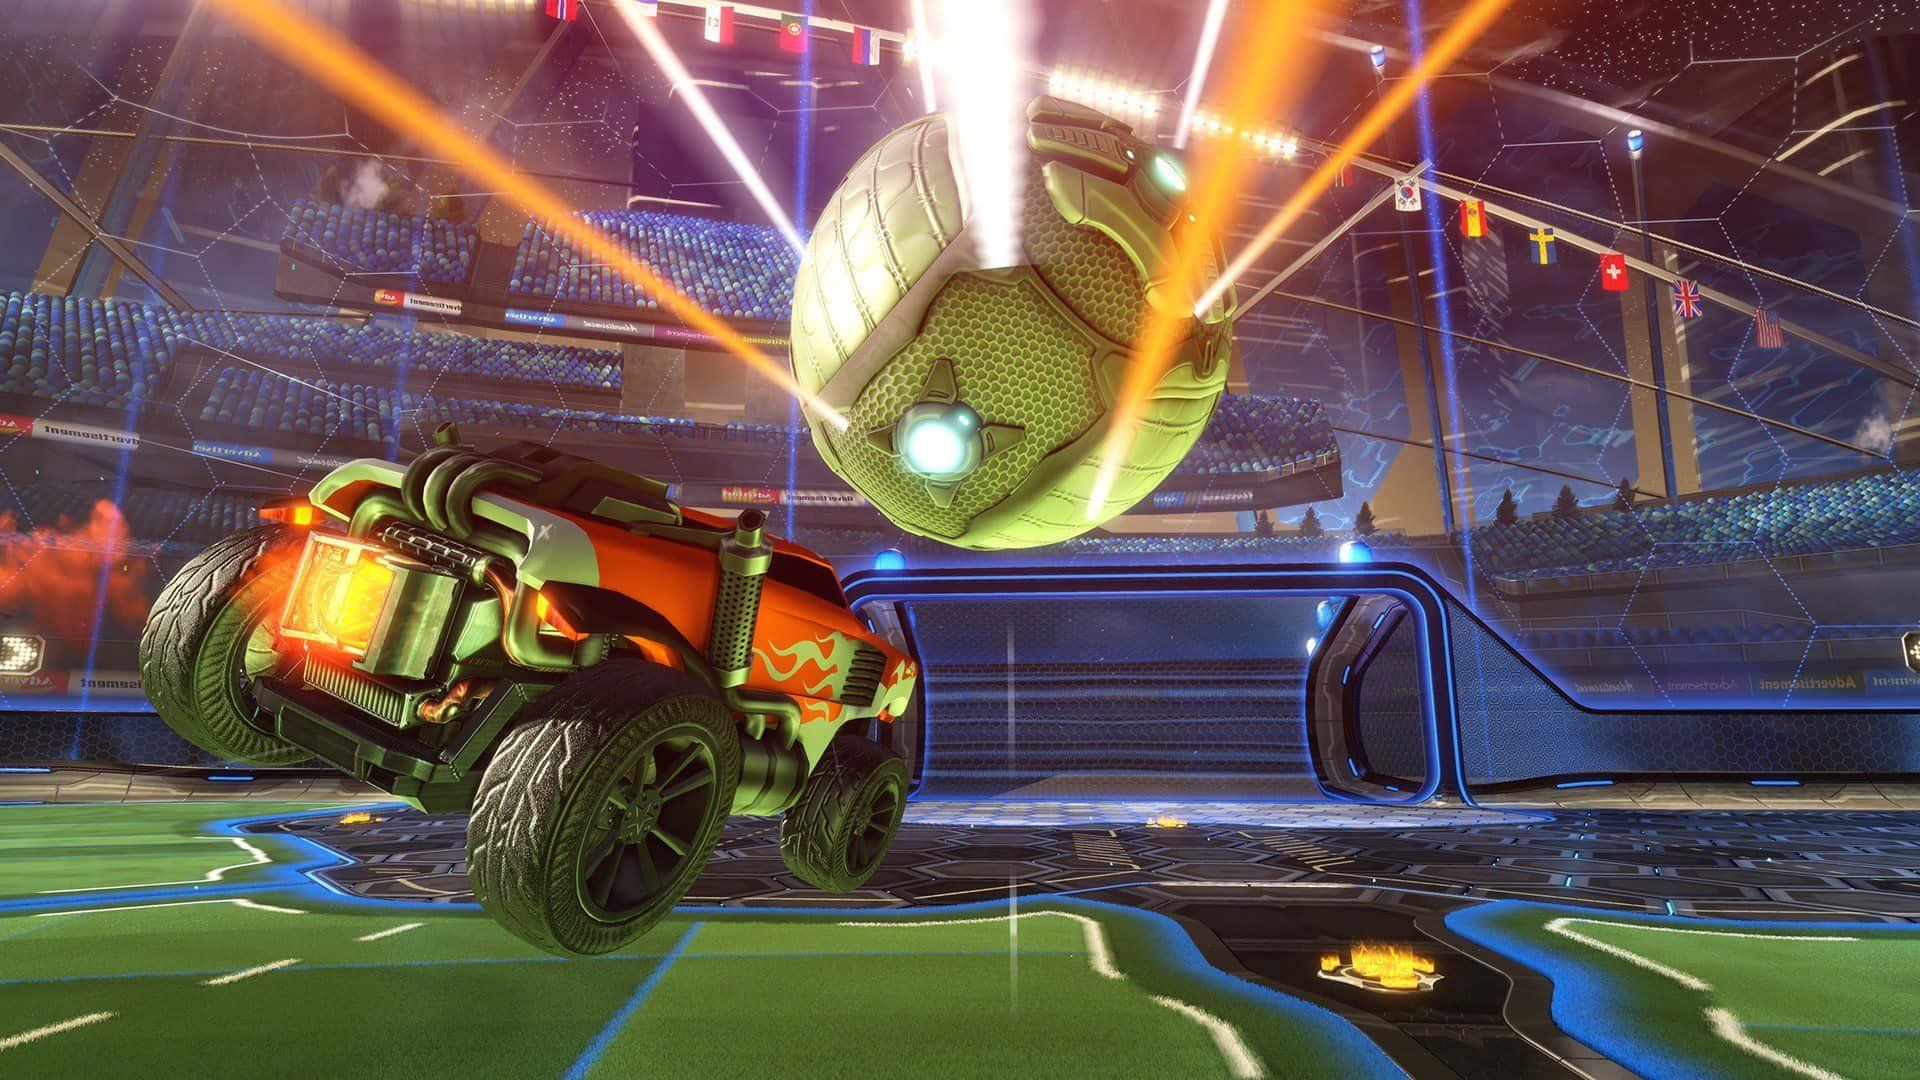 "Competitive eSports Action in HD Quality - Rocket League"